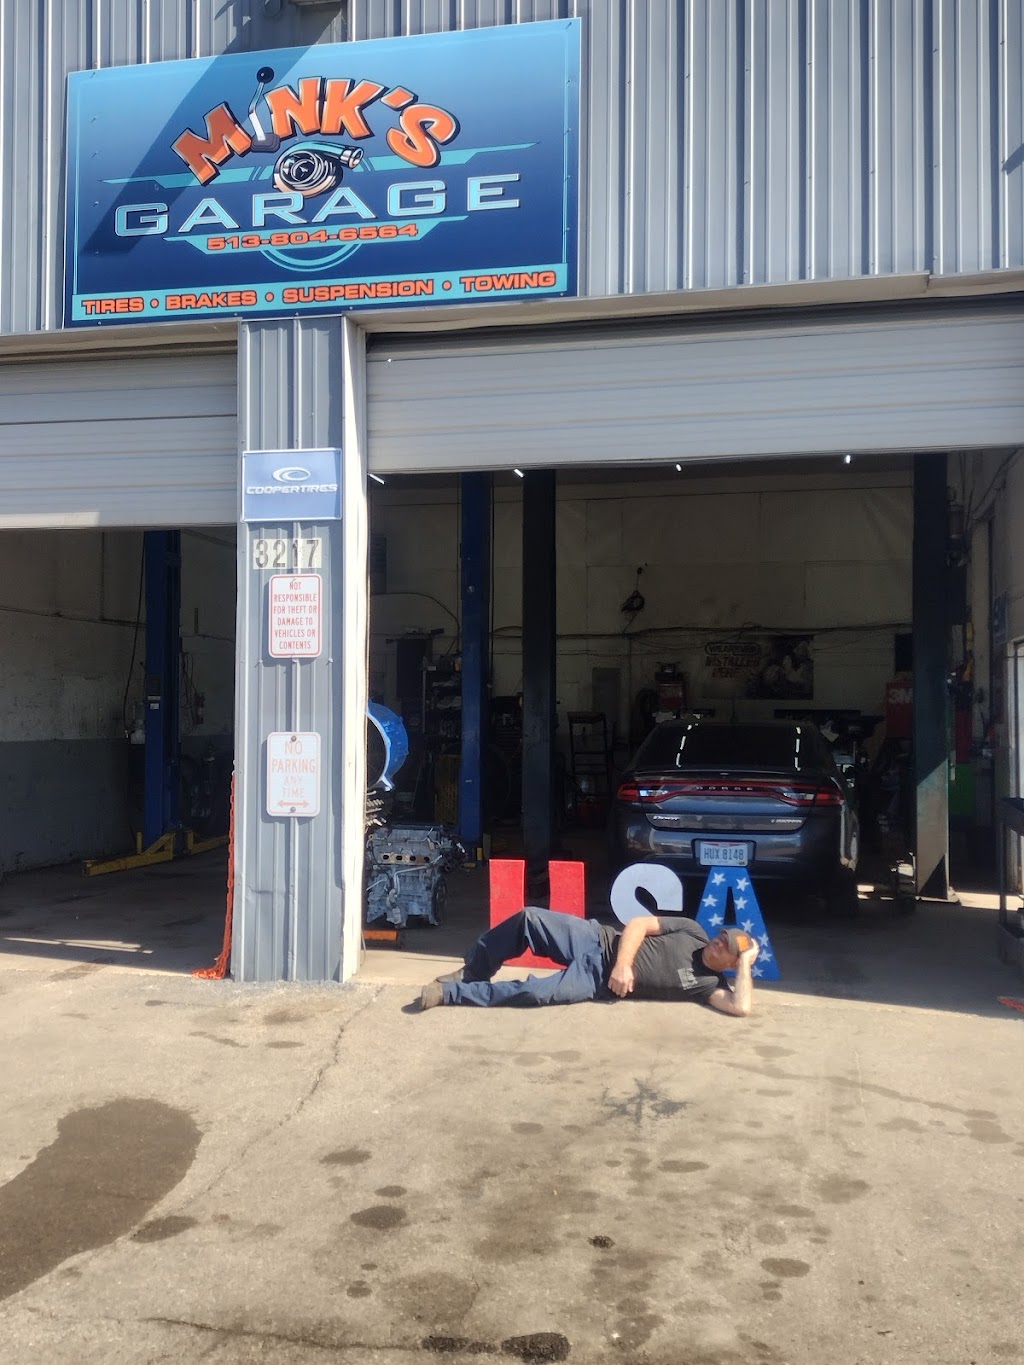 Minks Garage | 3217 Verity Pkwy, Middletown, OH 45044, USA | Phone: (513) 804-6564